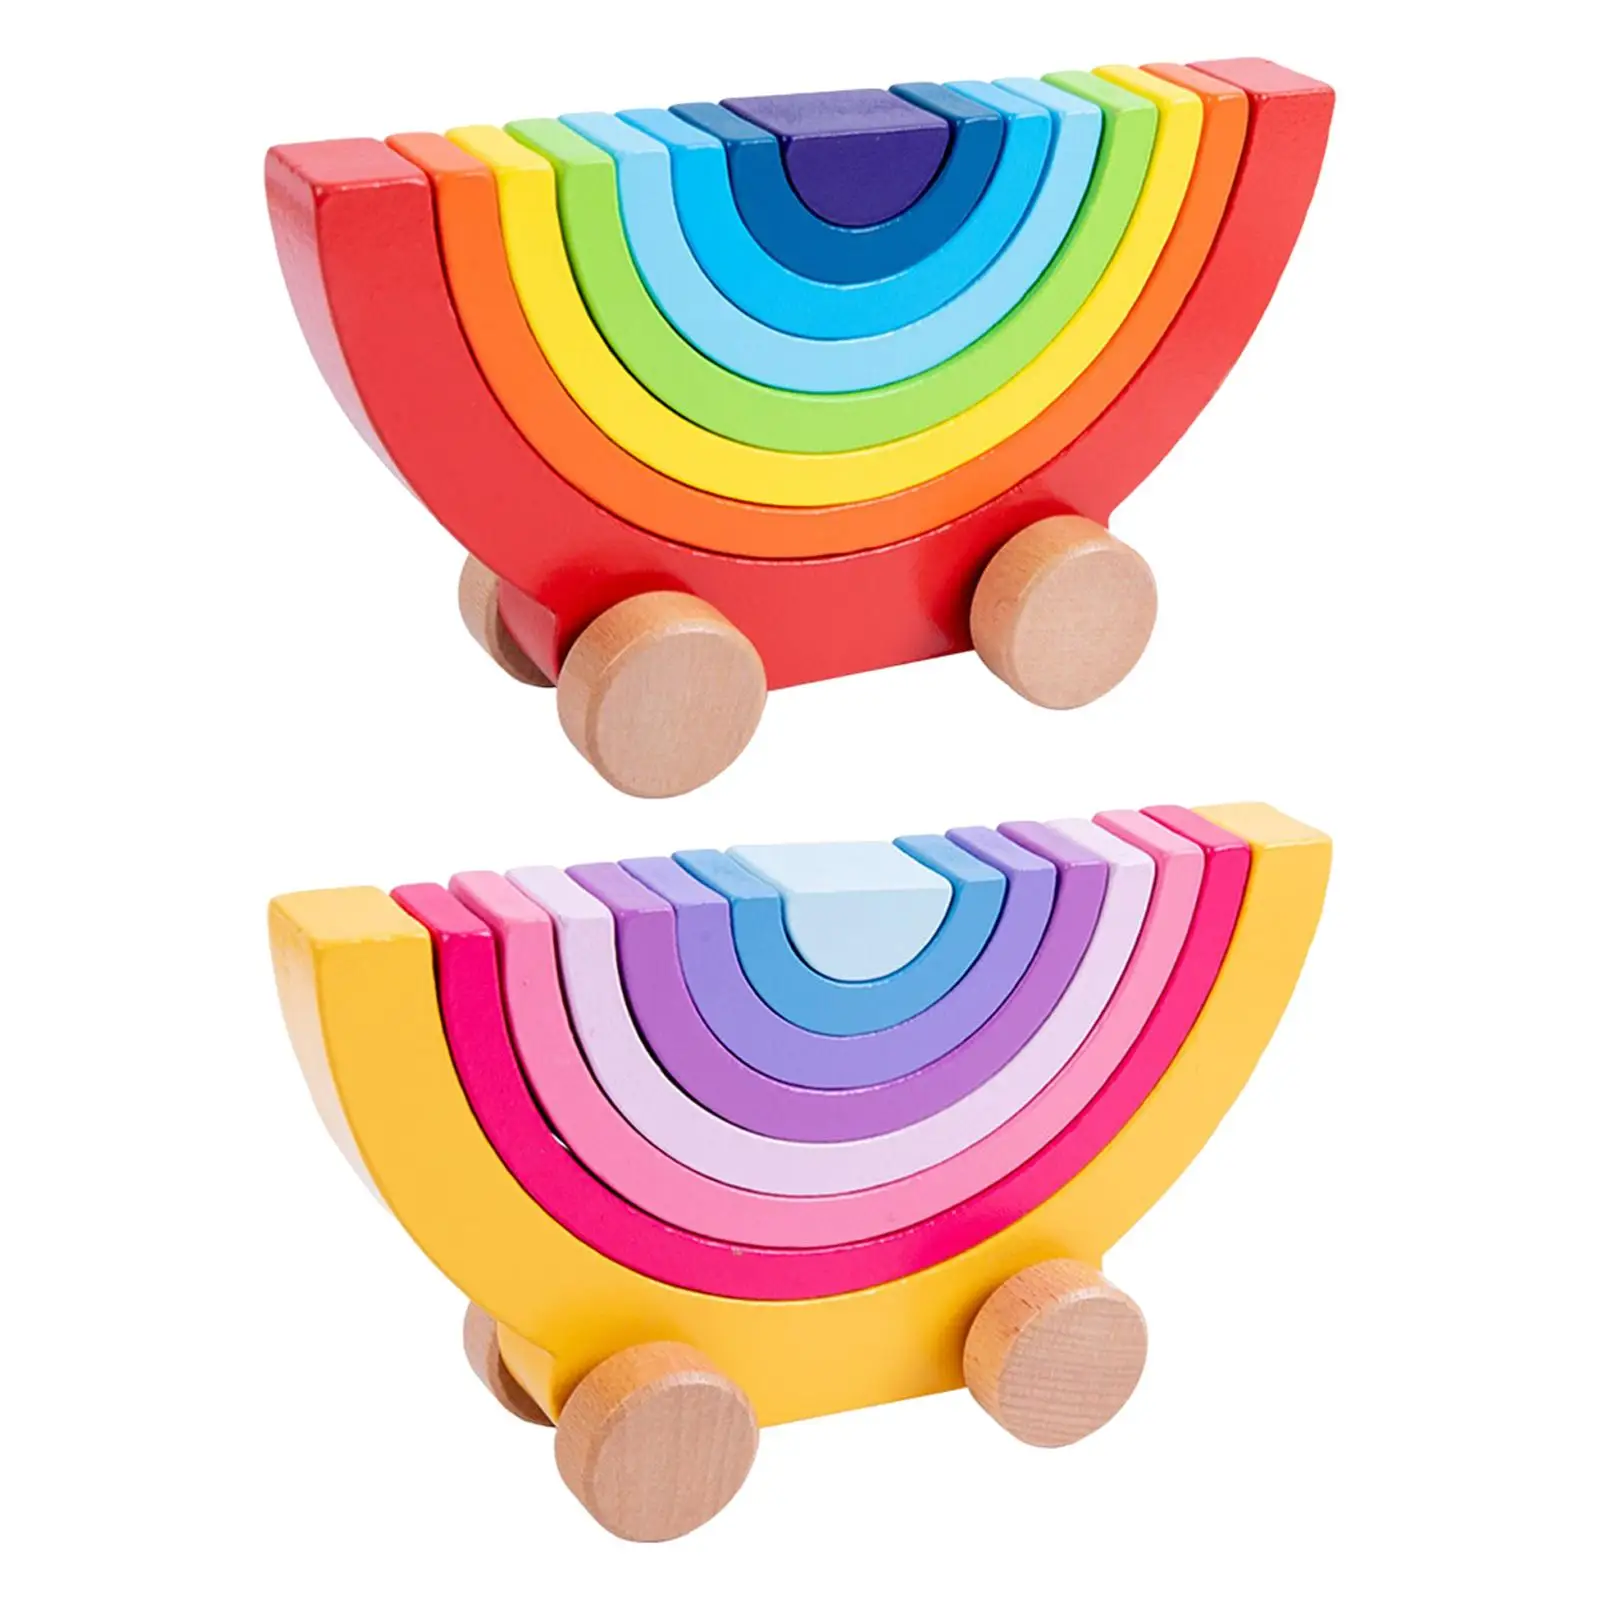 Wooden Building Blocks Car Toy Stackable Creative Stacker for Baby Teaching